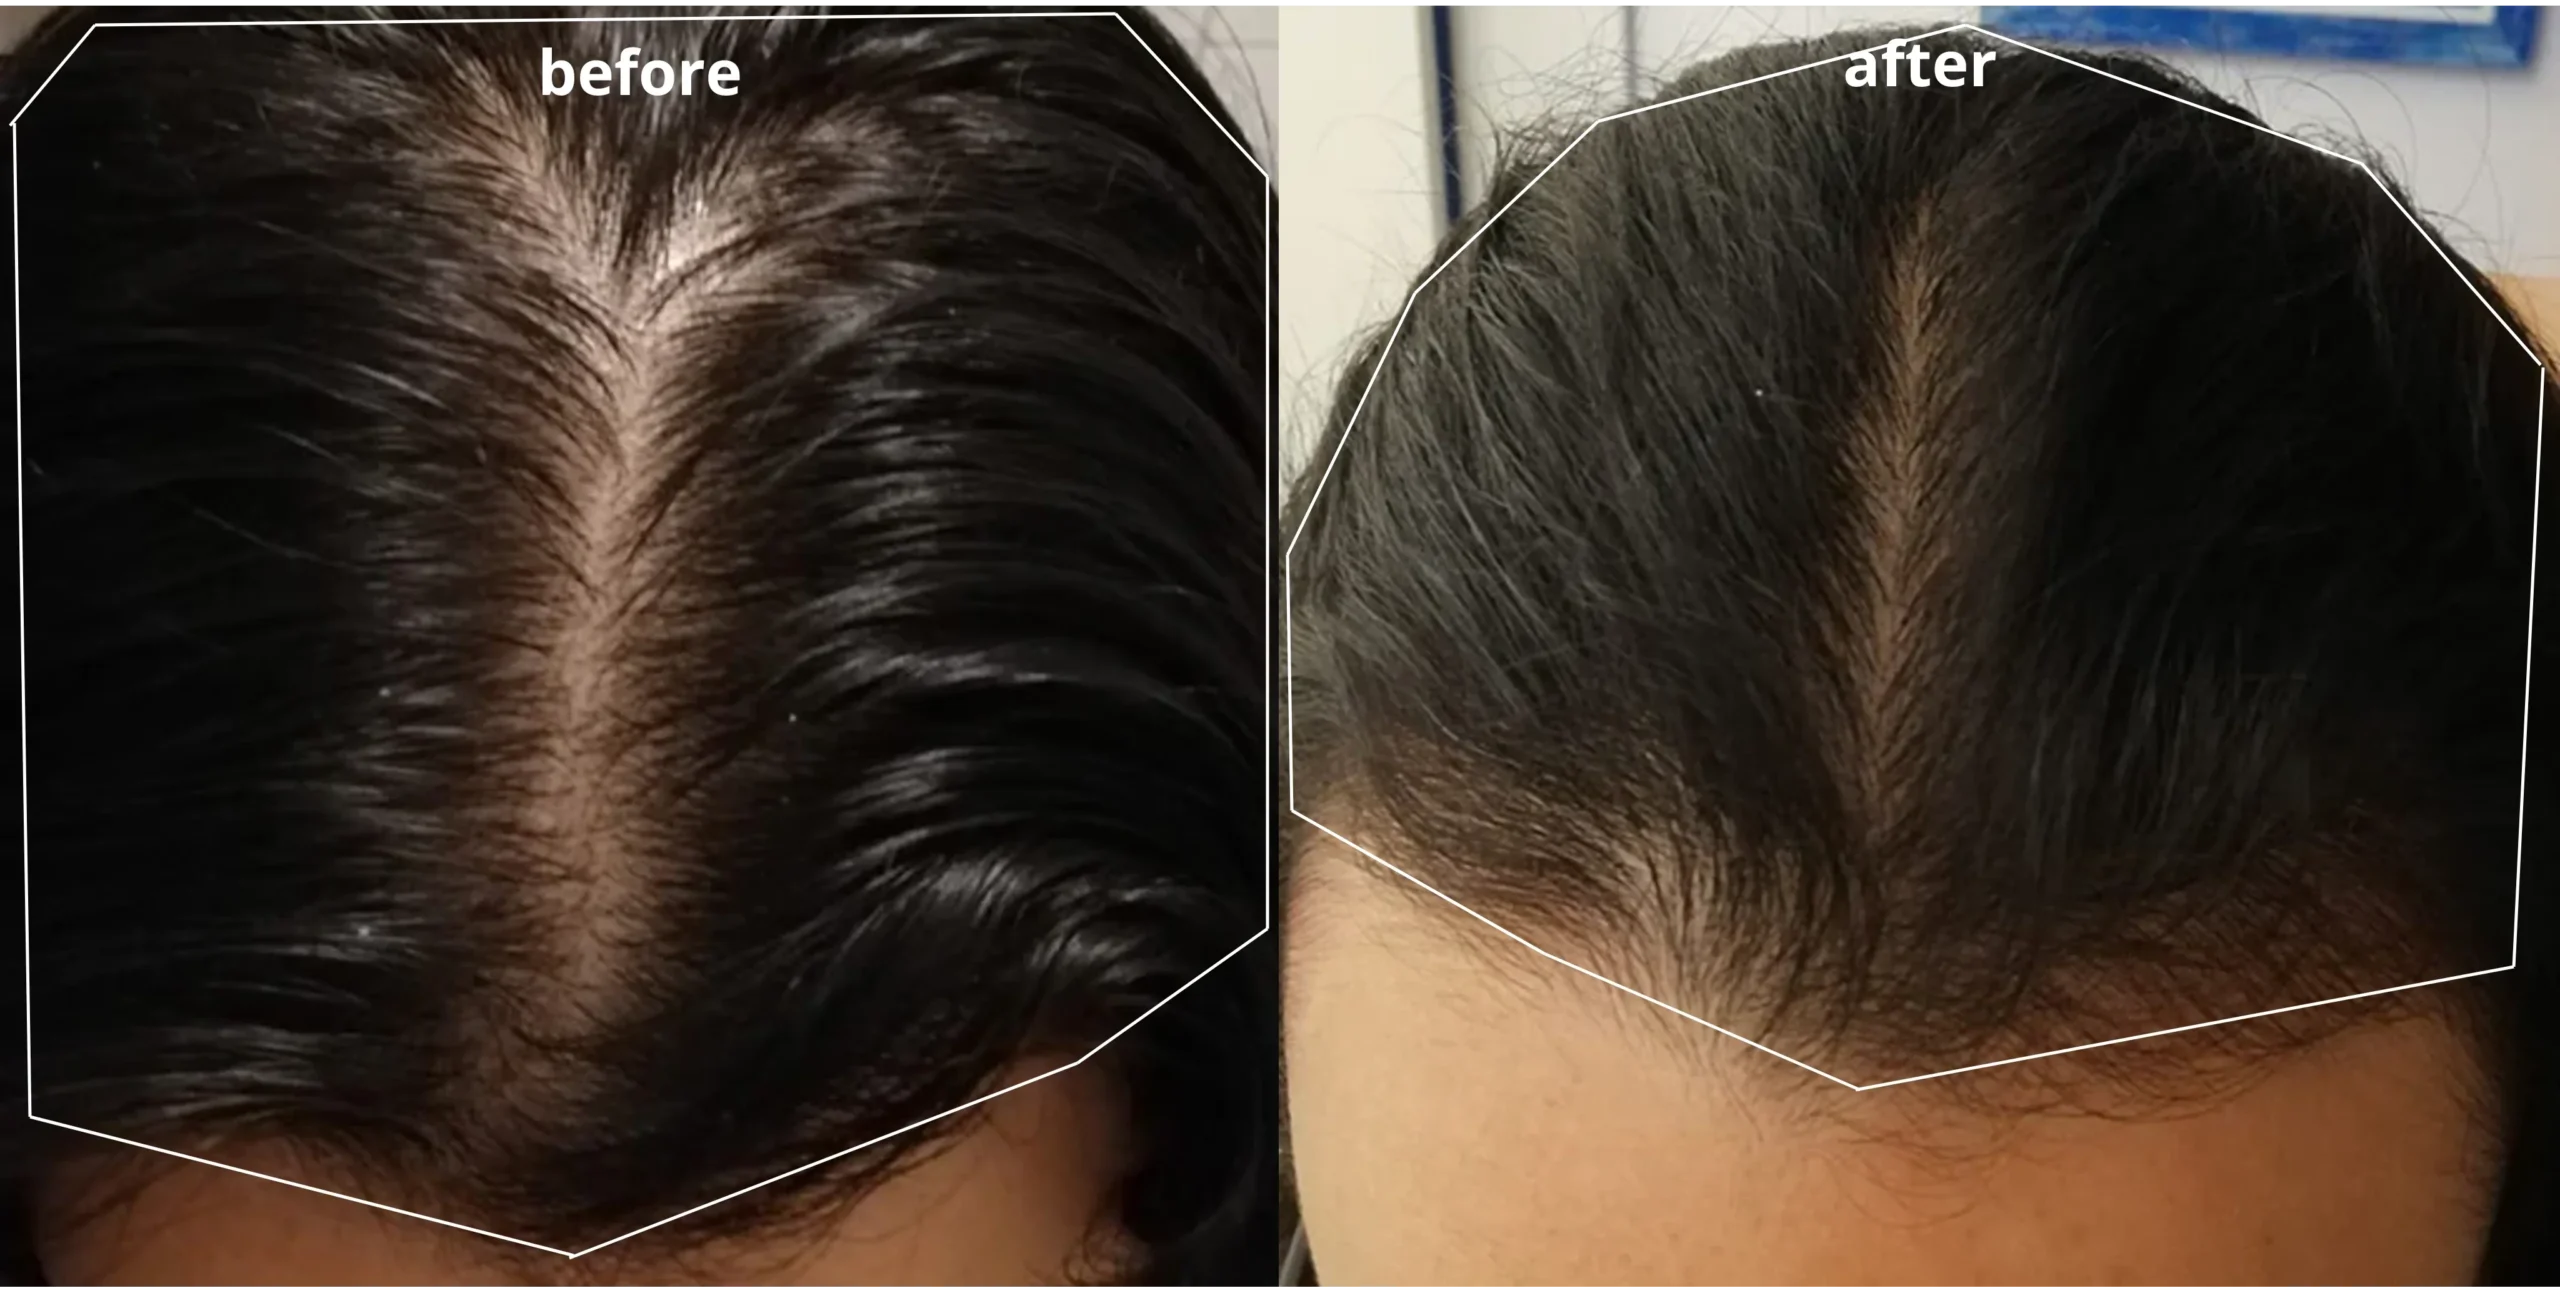 Can Hair Loss Due to Stress Be Reversed?